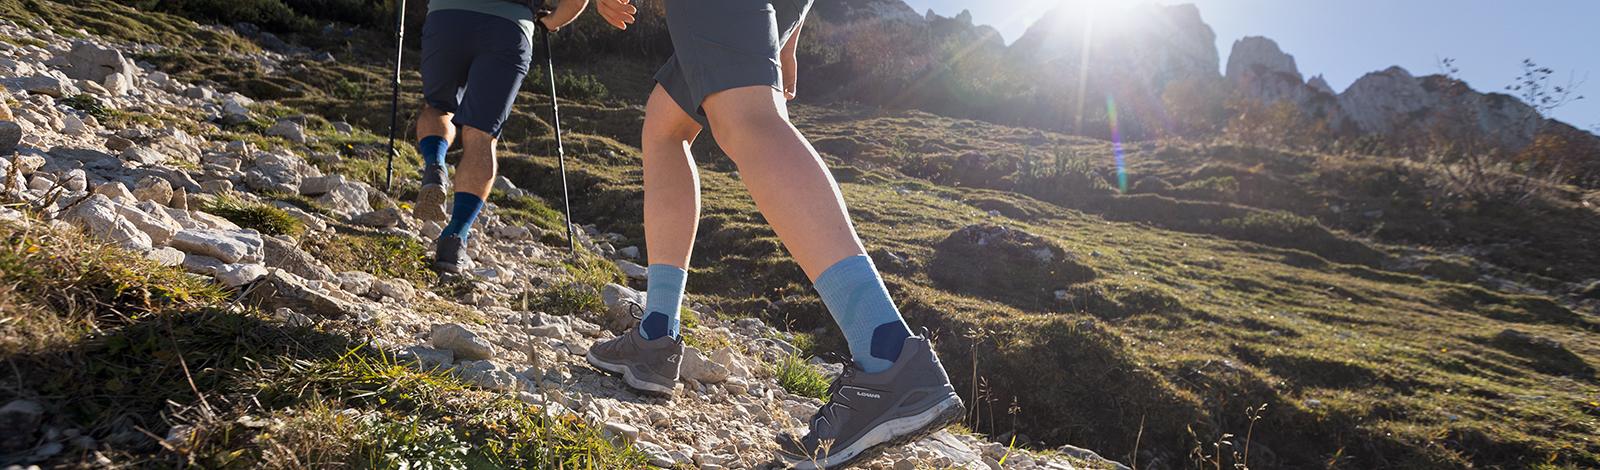 Two hikers with medium -length blue hiking socks go up a rubble path in an idyllic green mountain landscape